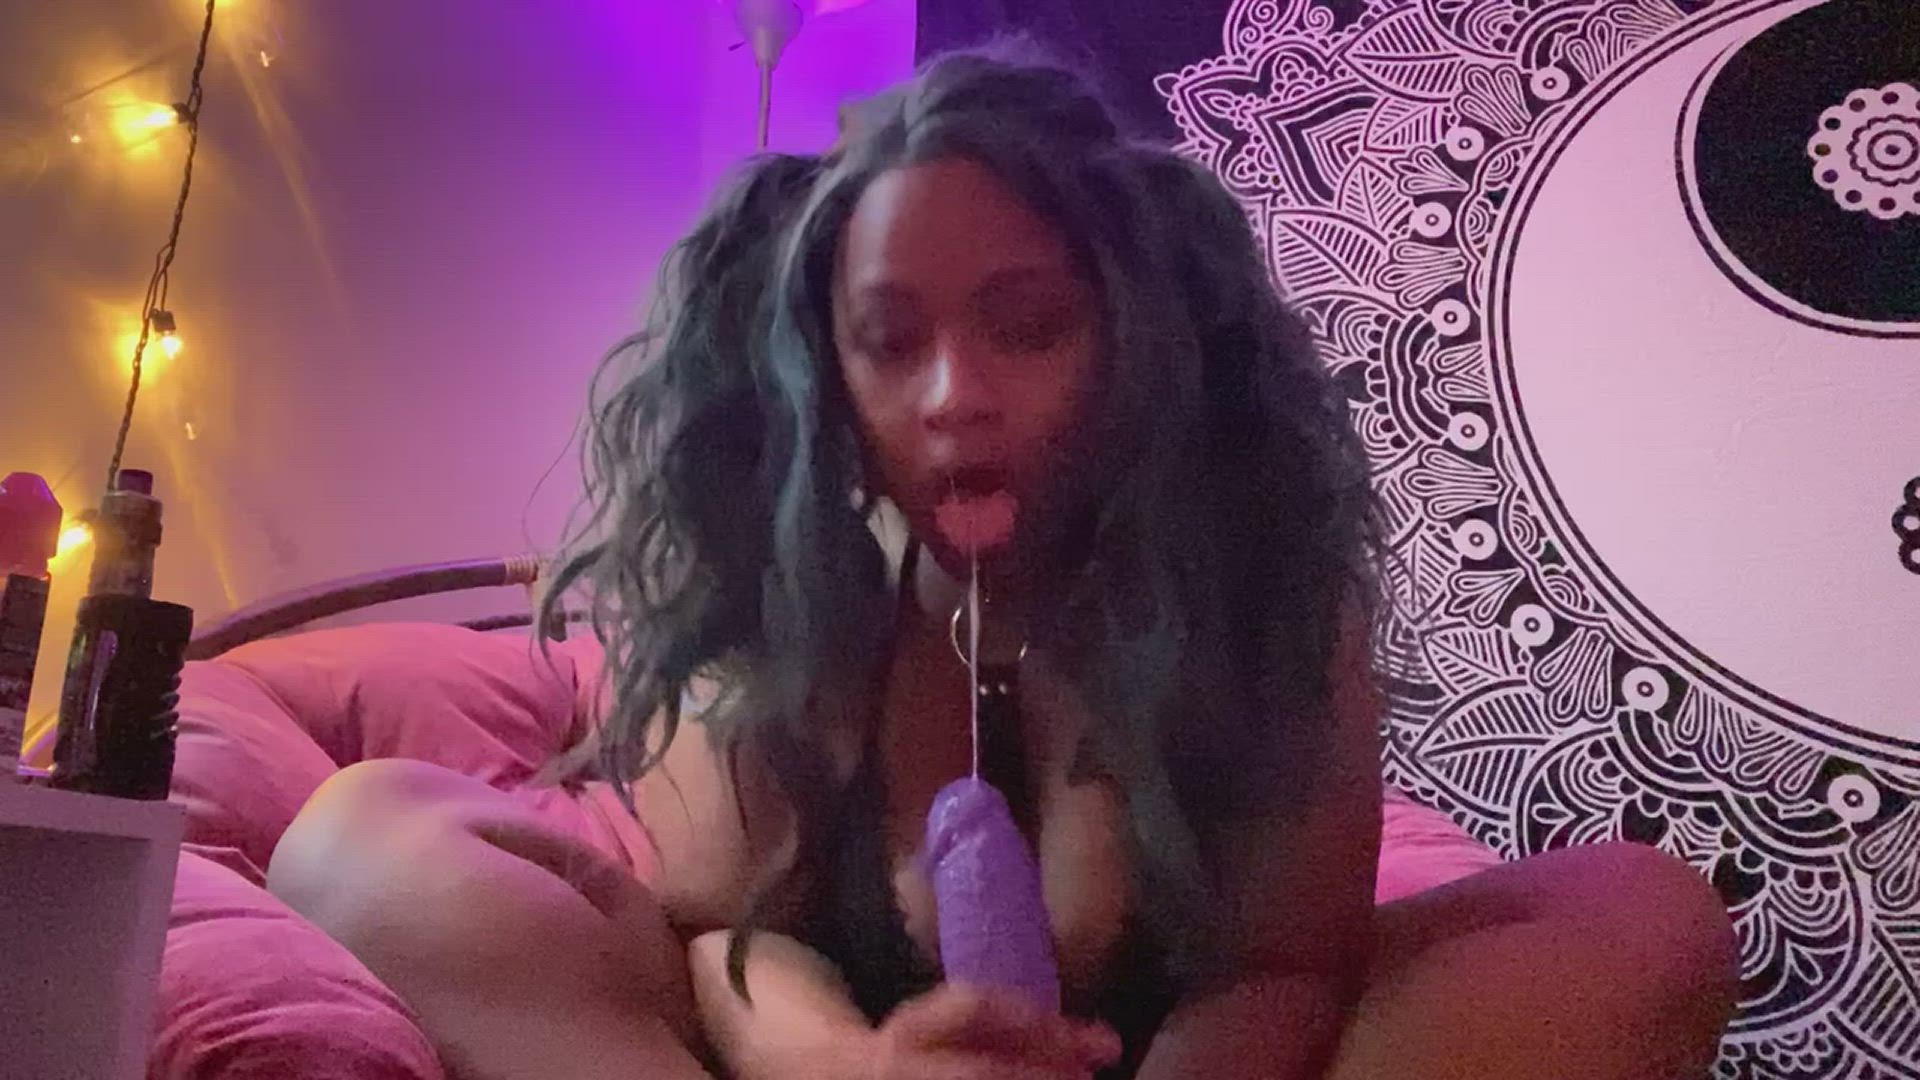 Dildo porn video with onlyfans model DaddyzLilDolly <strong>@daddyzlildolly</strong>